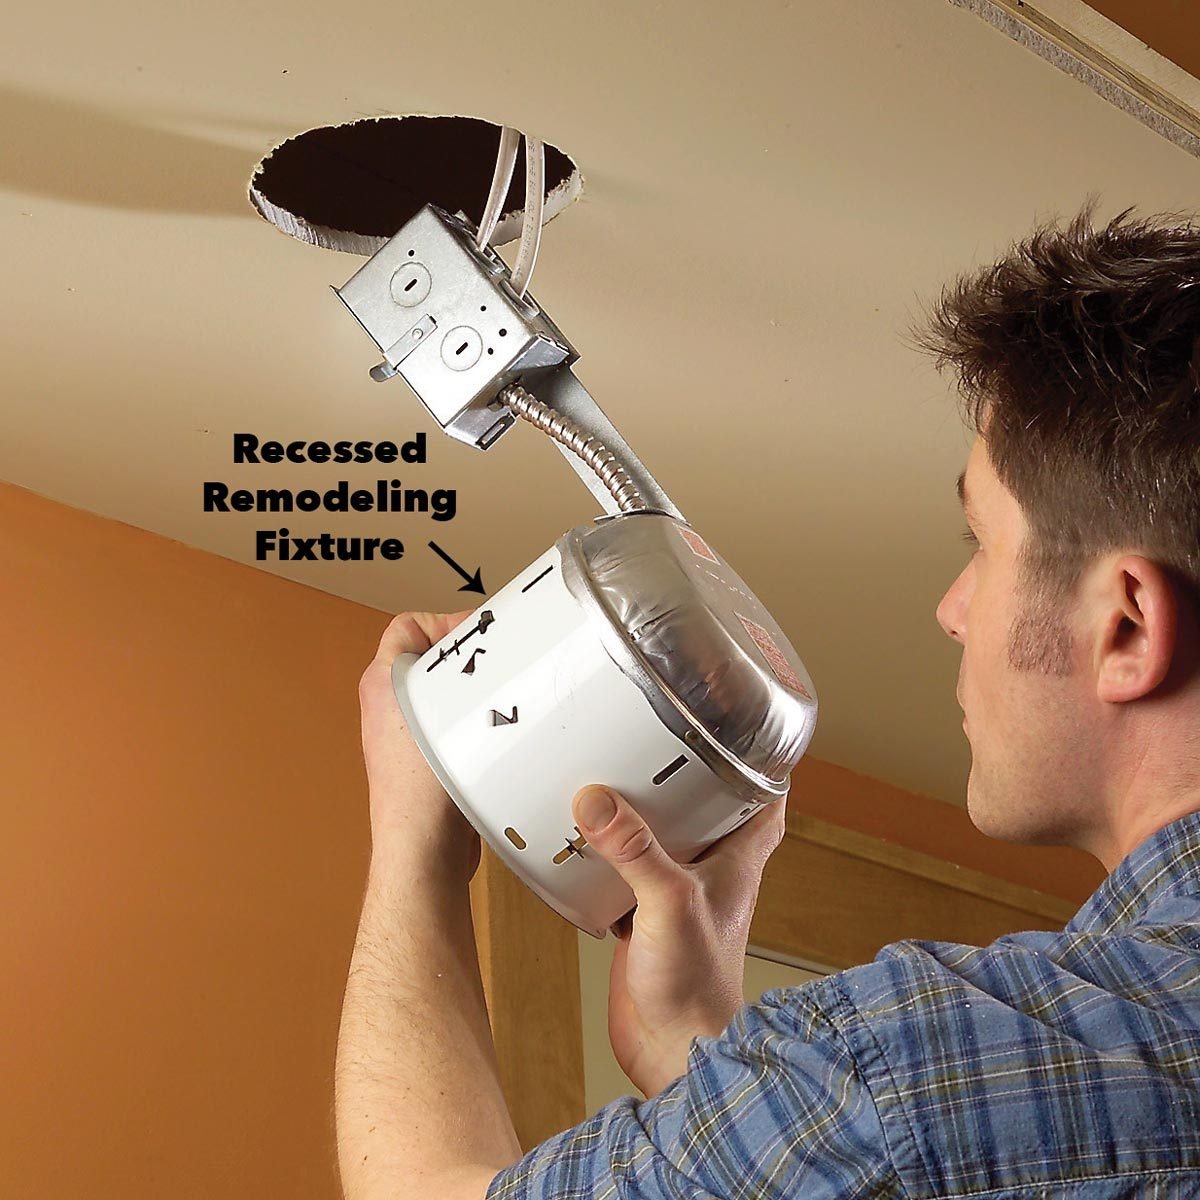 Install the recessed remodeling fixtures